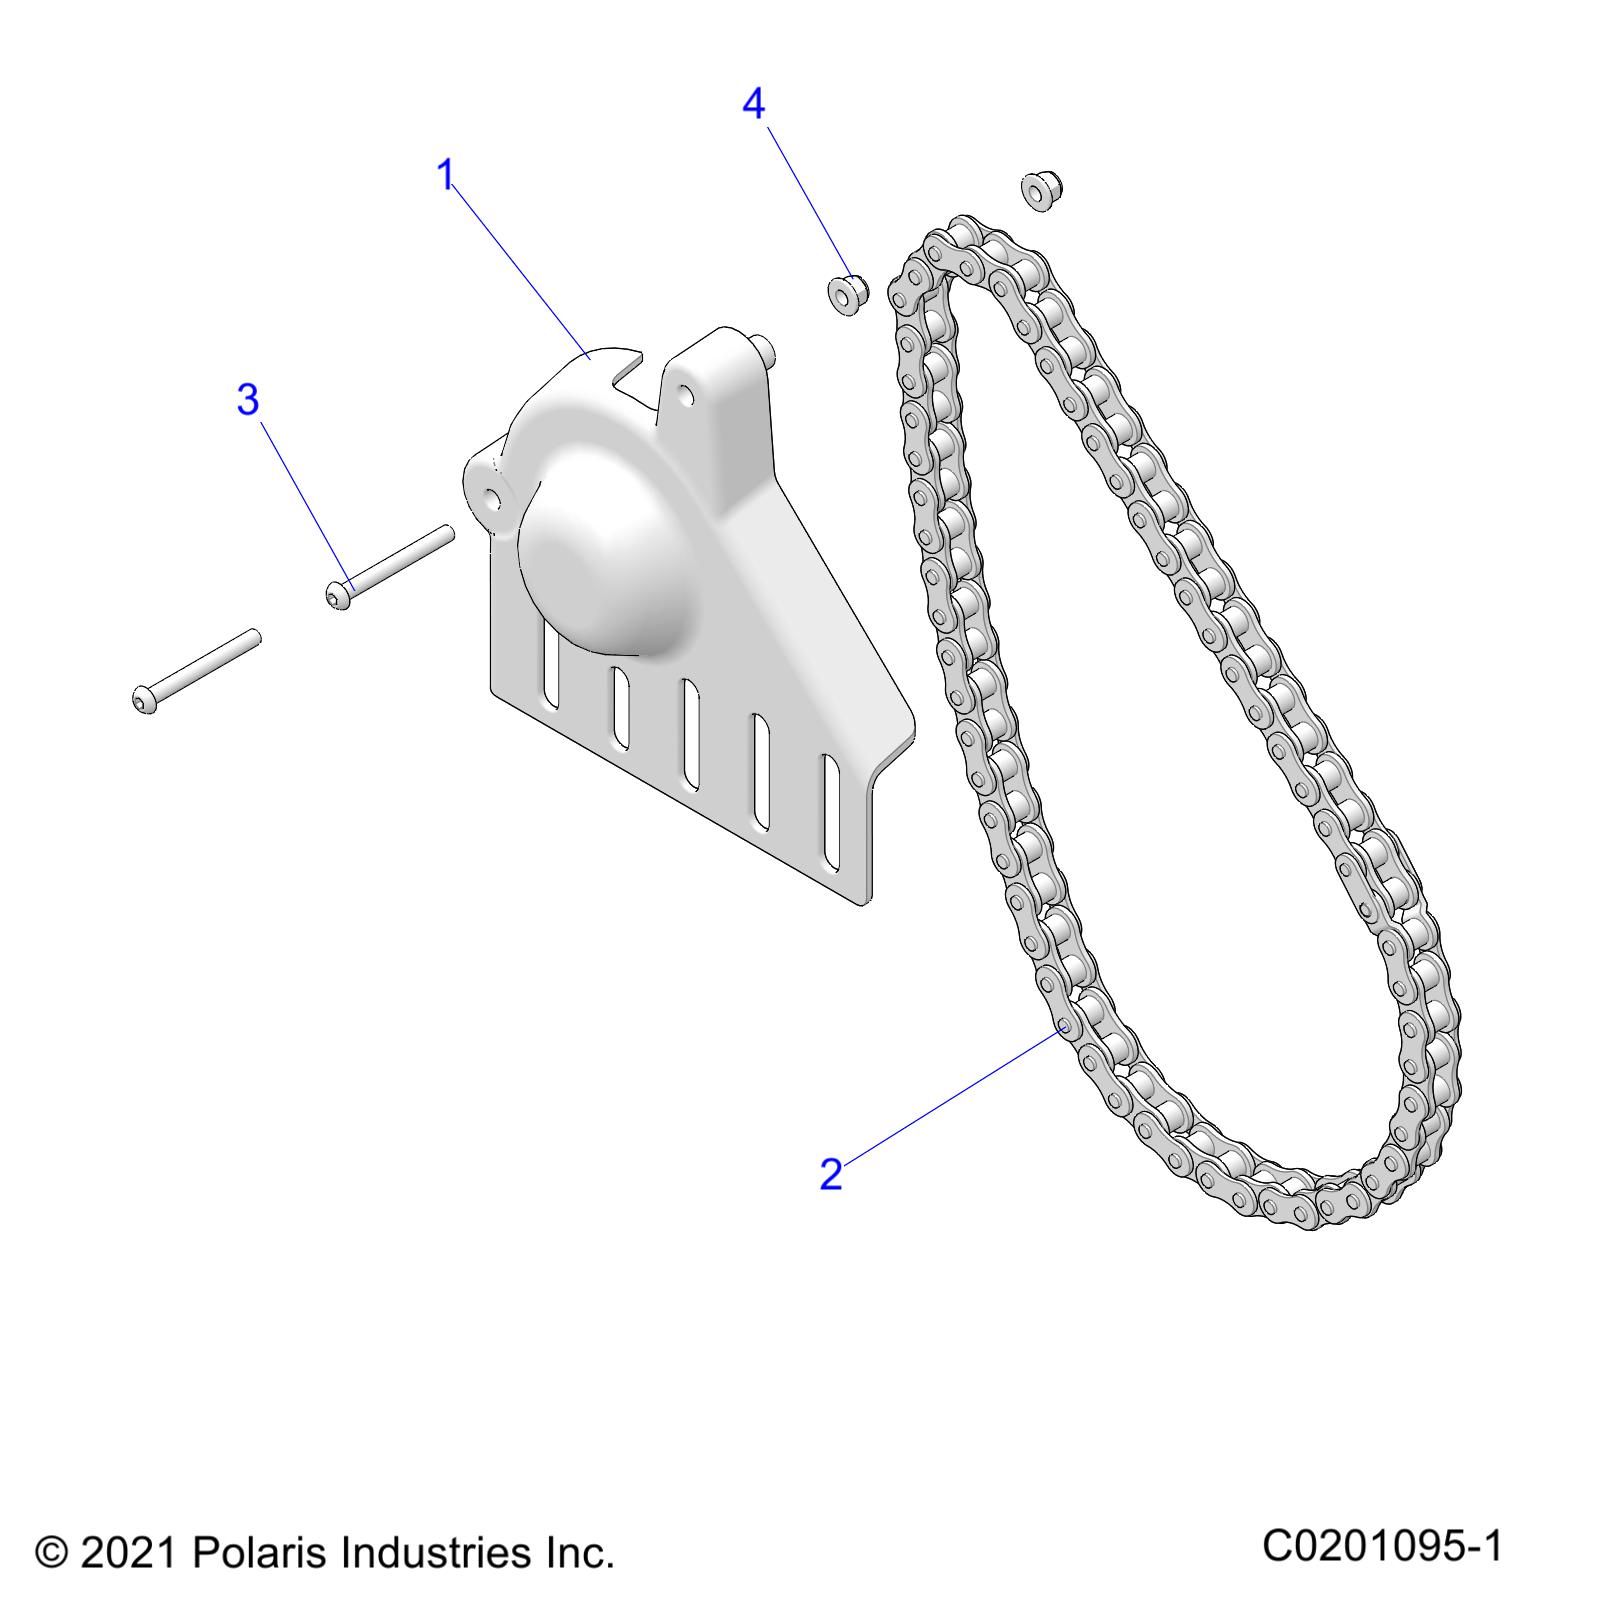 Part Number : 3225035 CHAIN- 50X55P